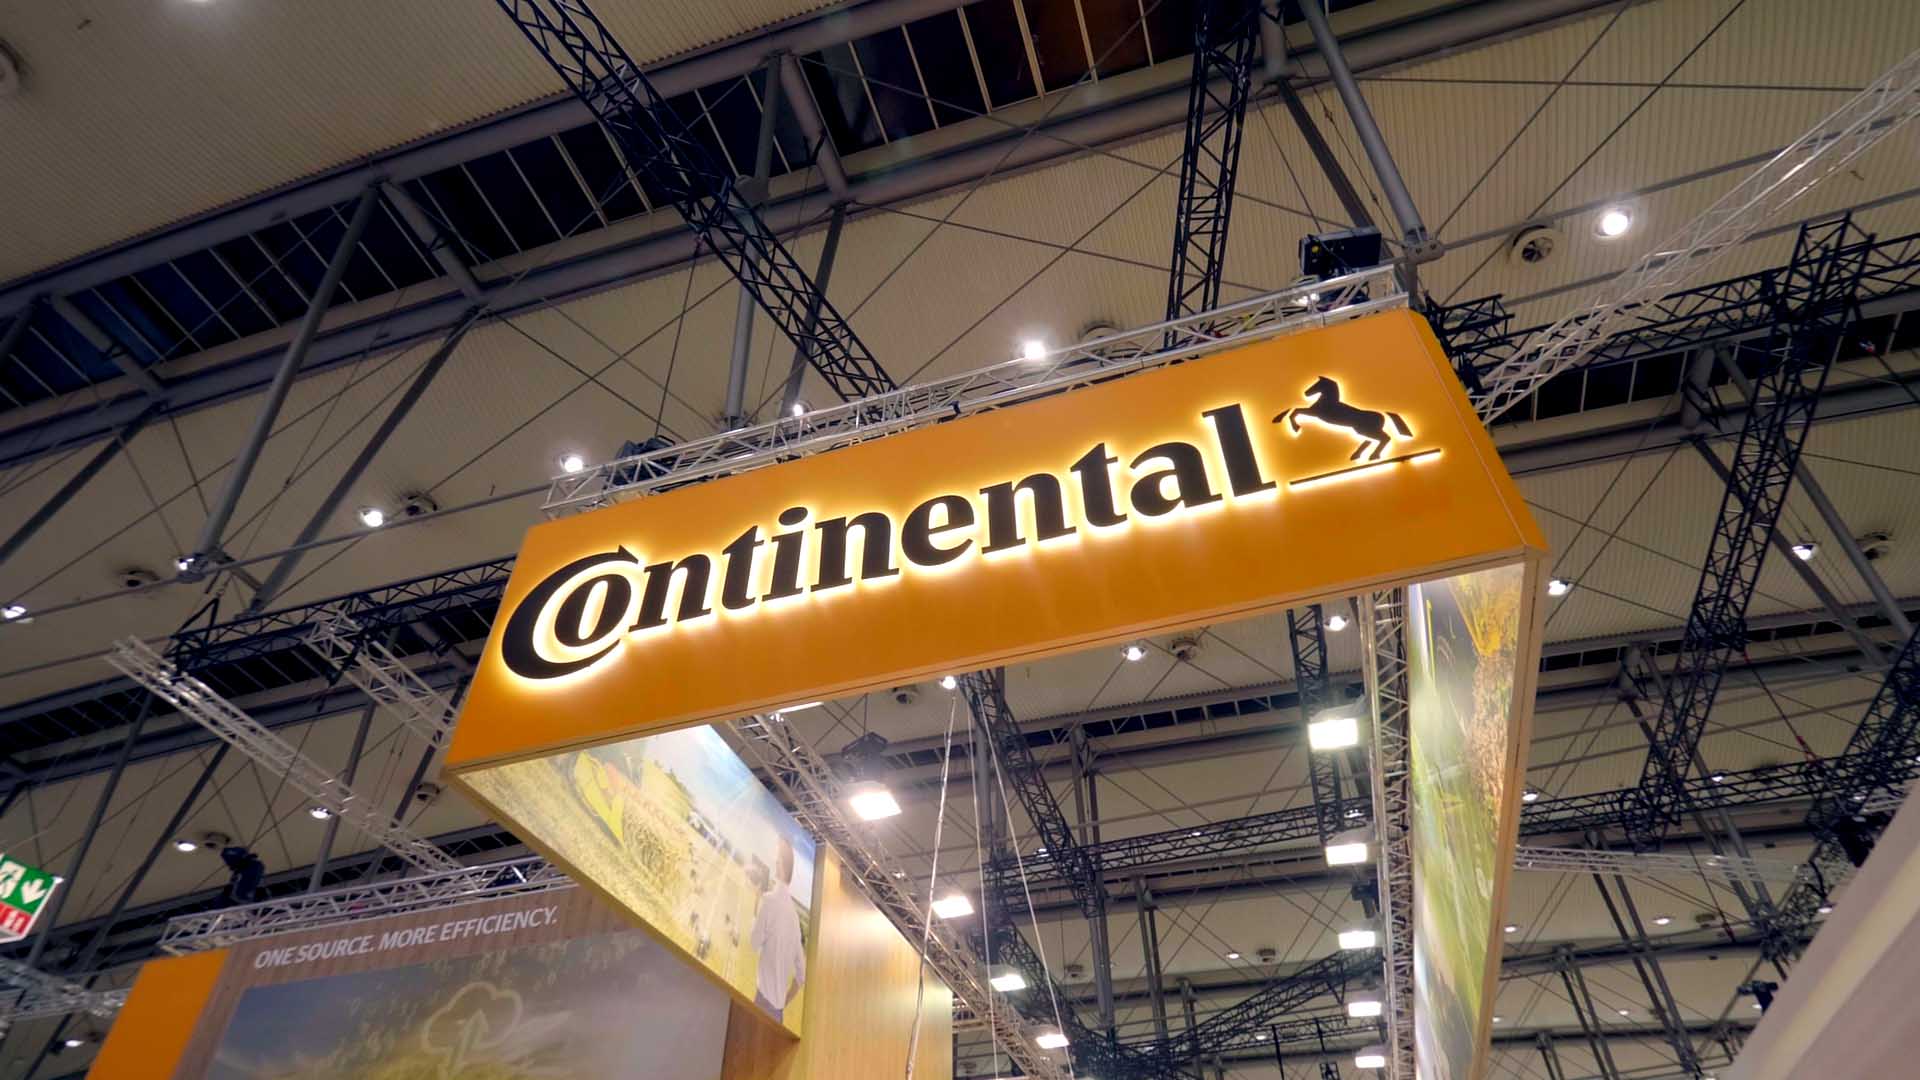 Continental Agritechnica